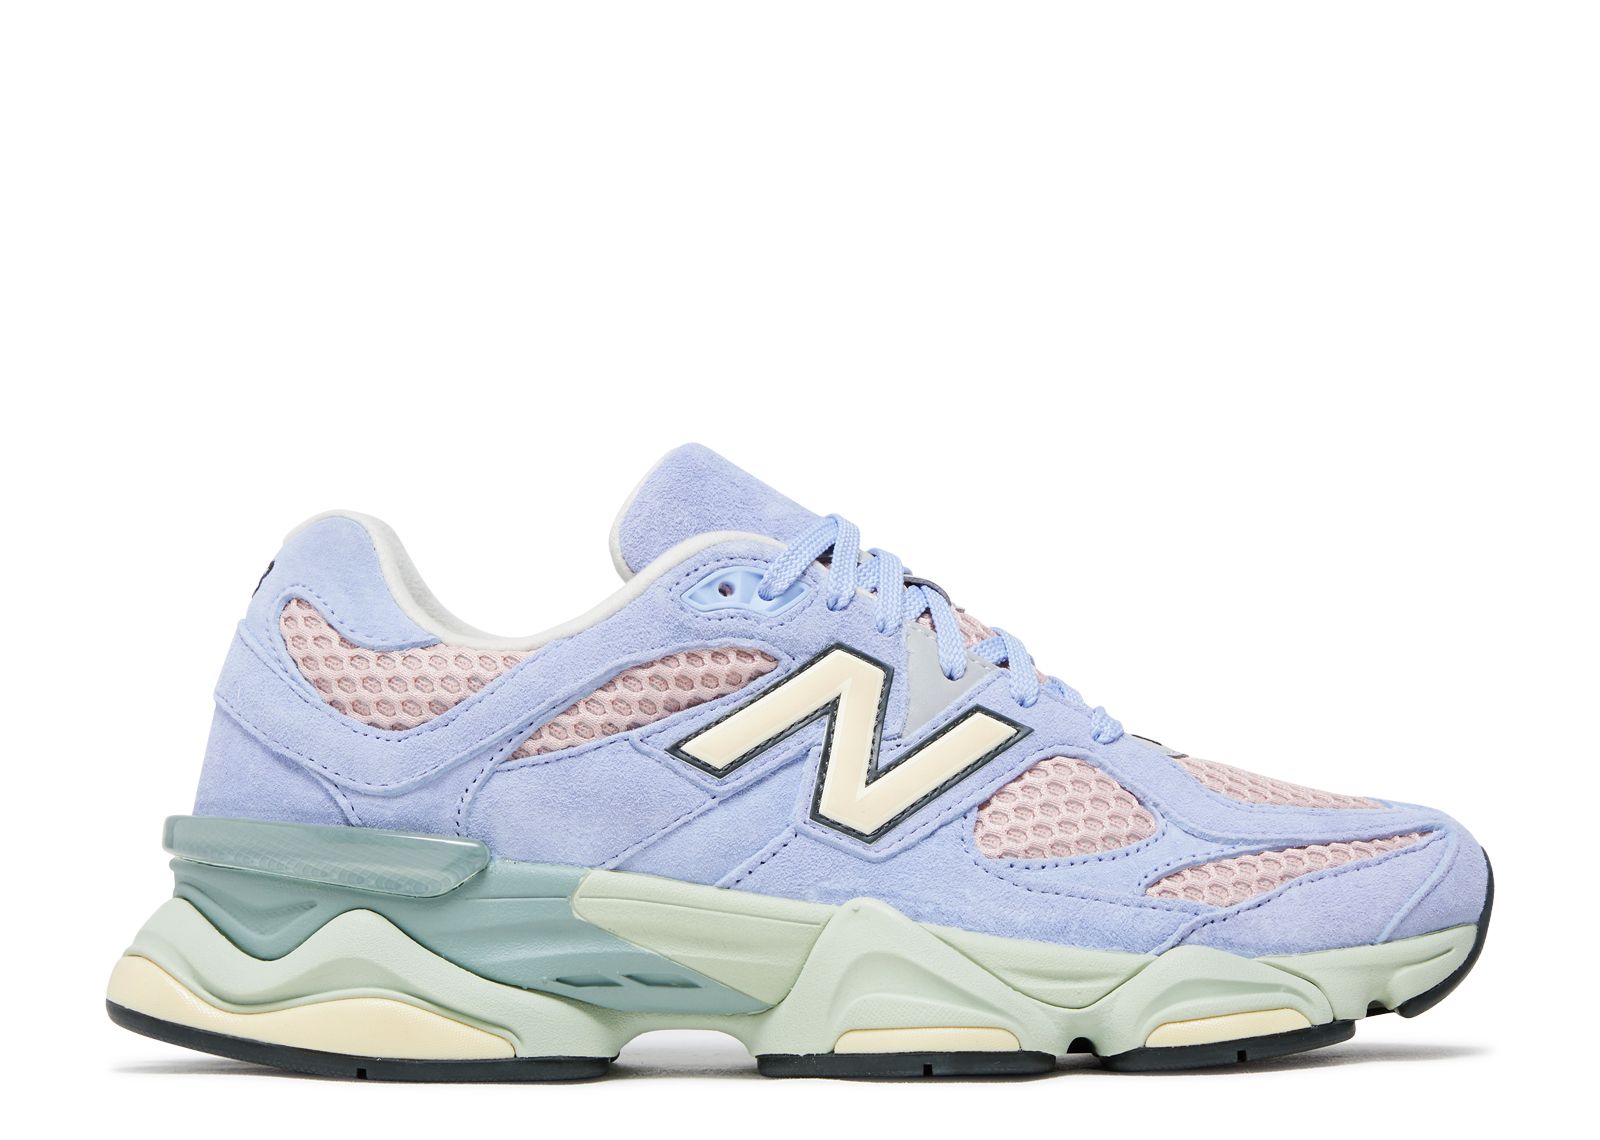 Кроссовки New Balance The Whitaker Group X 9060 'Missing Pieces Pack - Daydream Blue', синий